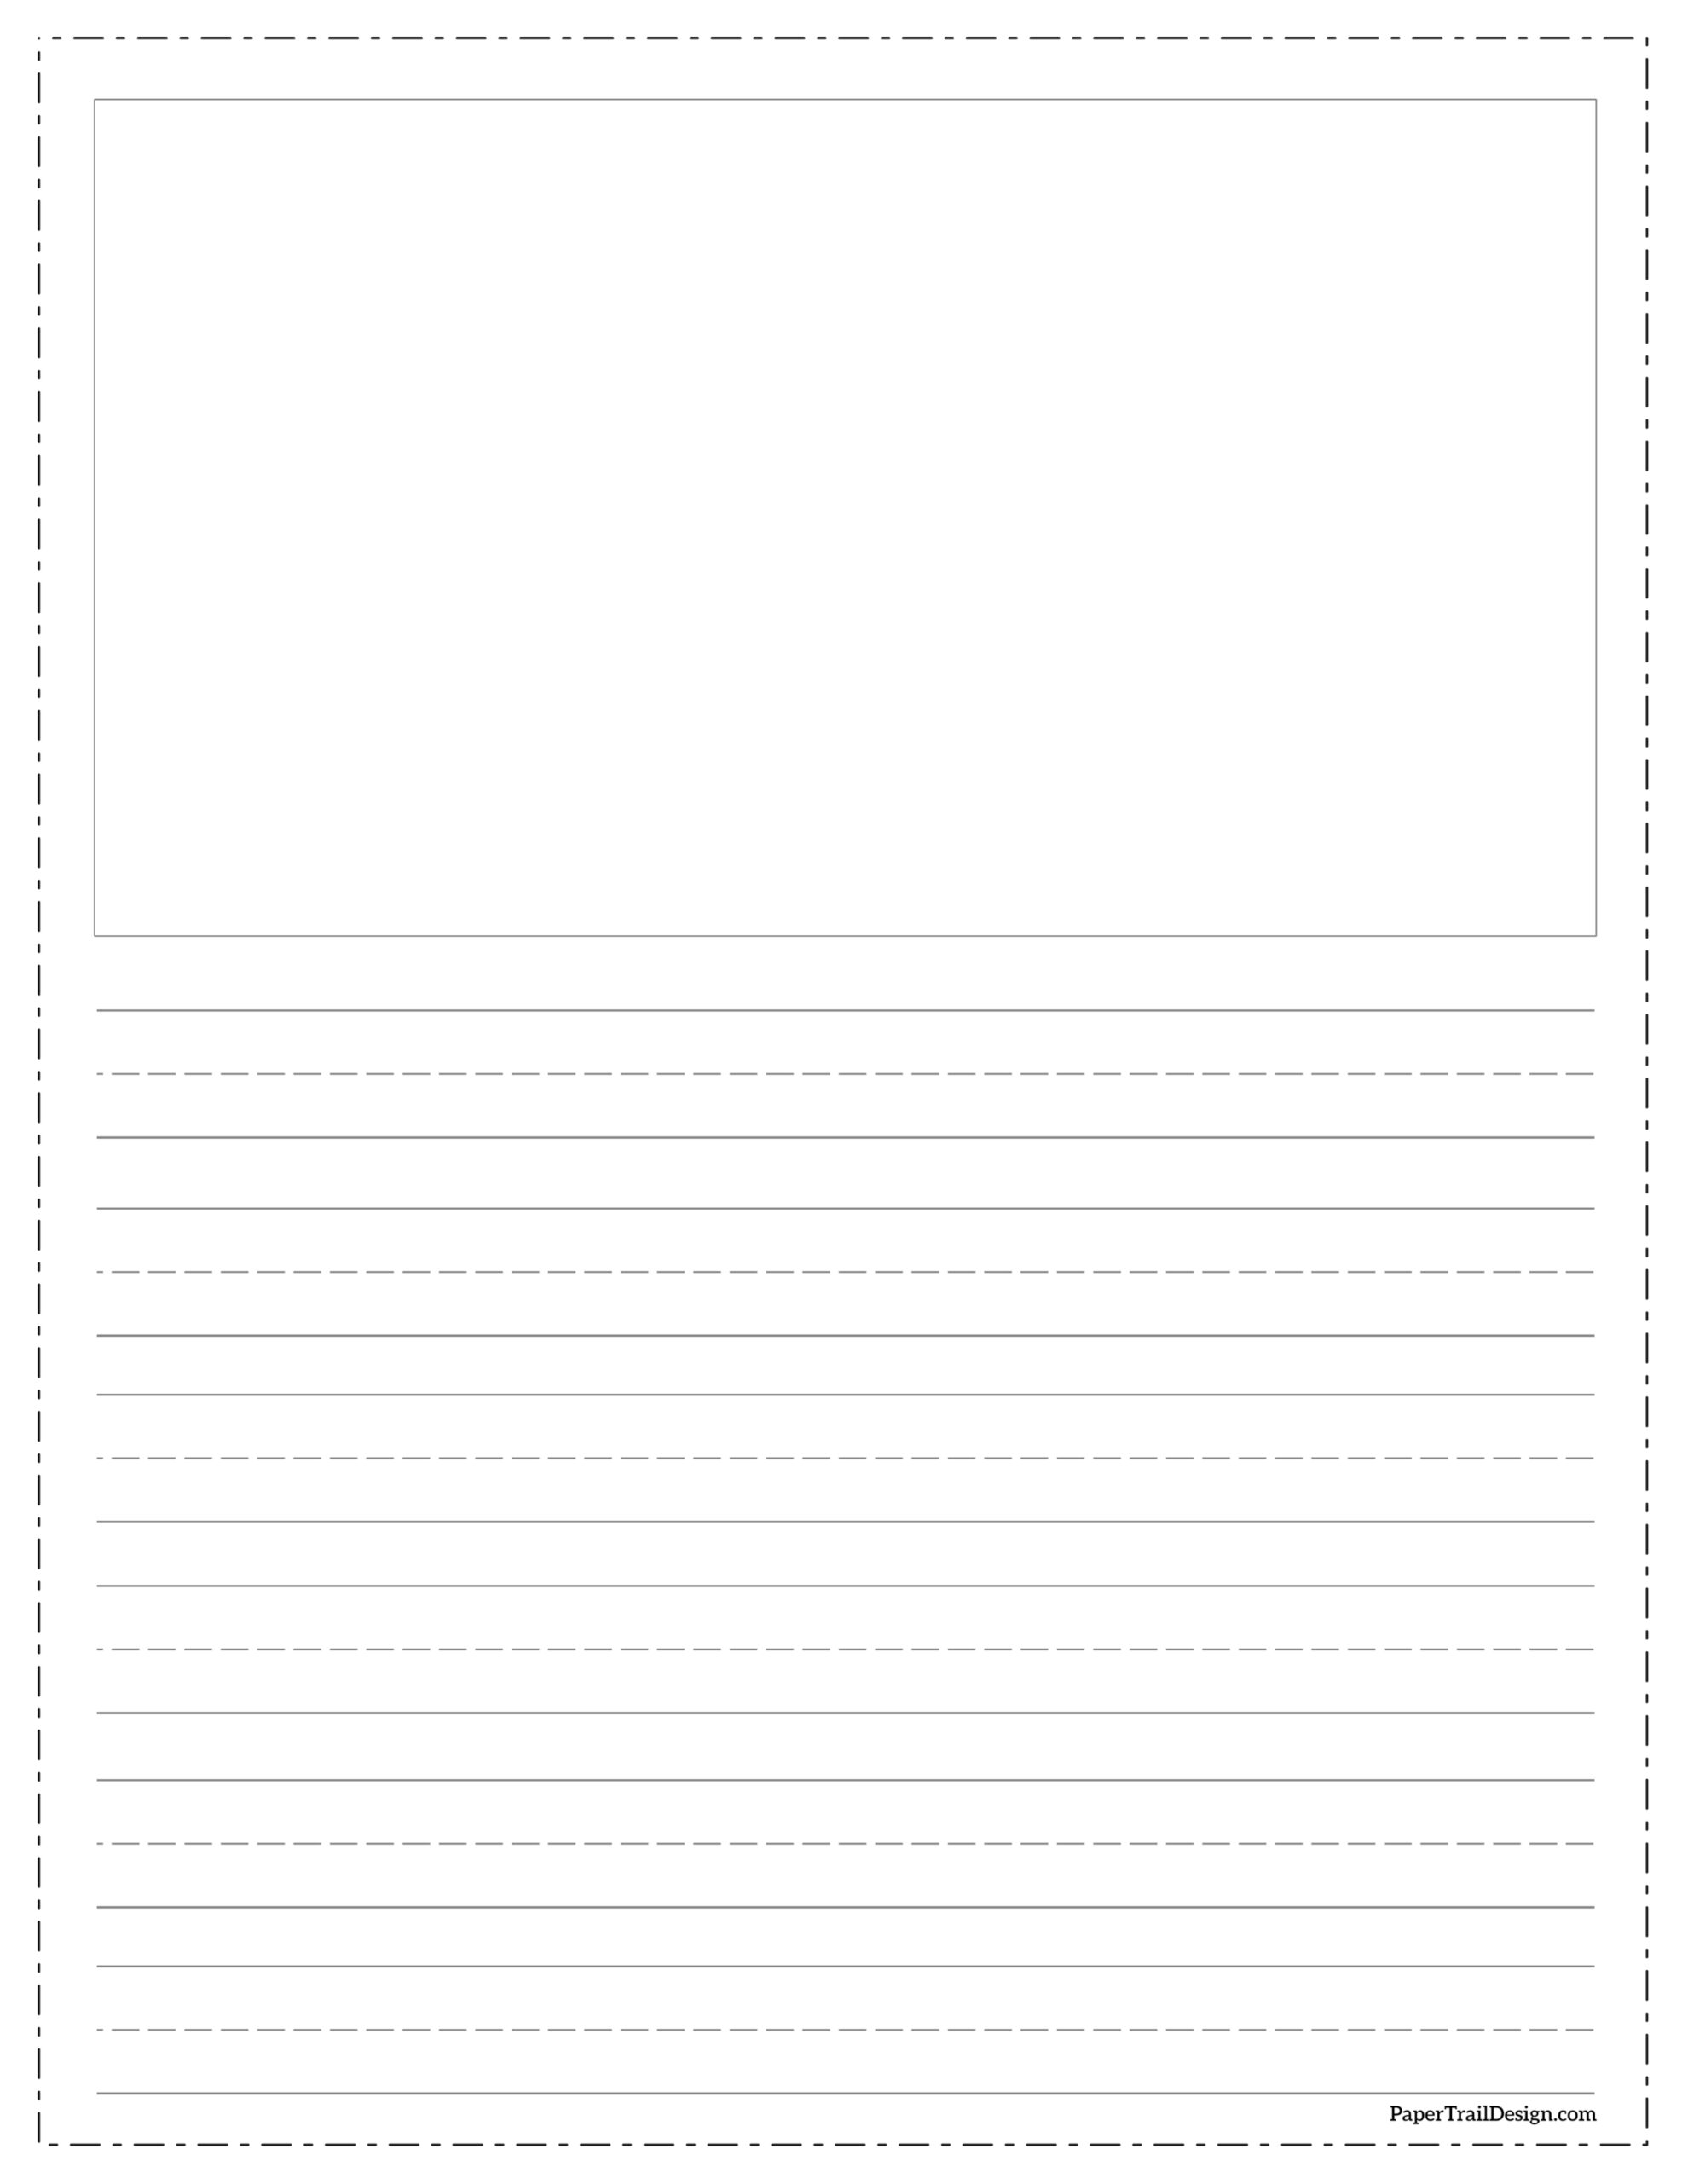 free-printable-lined-paper-handwriting-paper-template-paper-trail-6